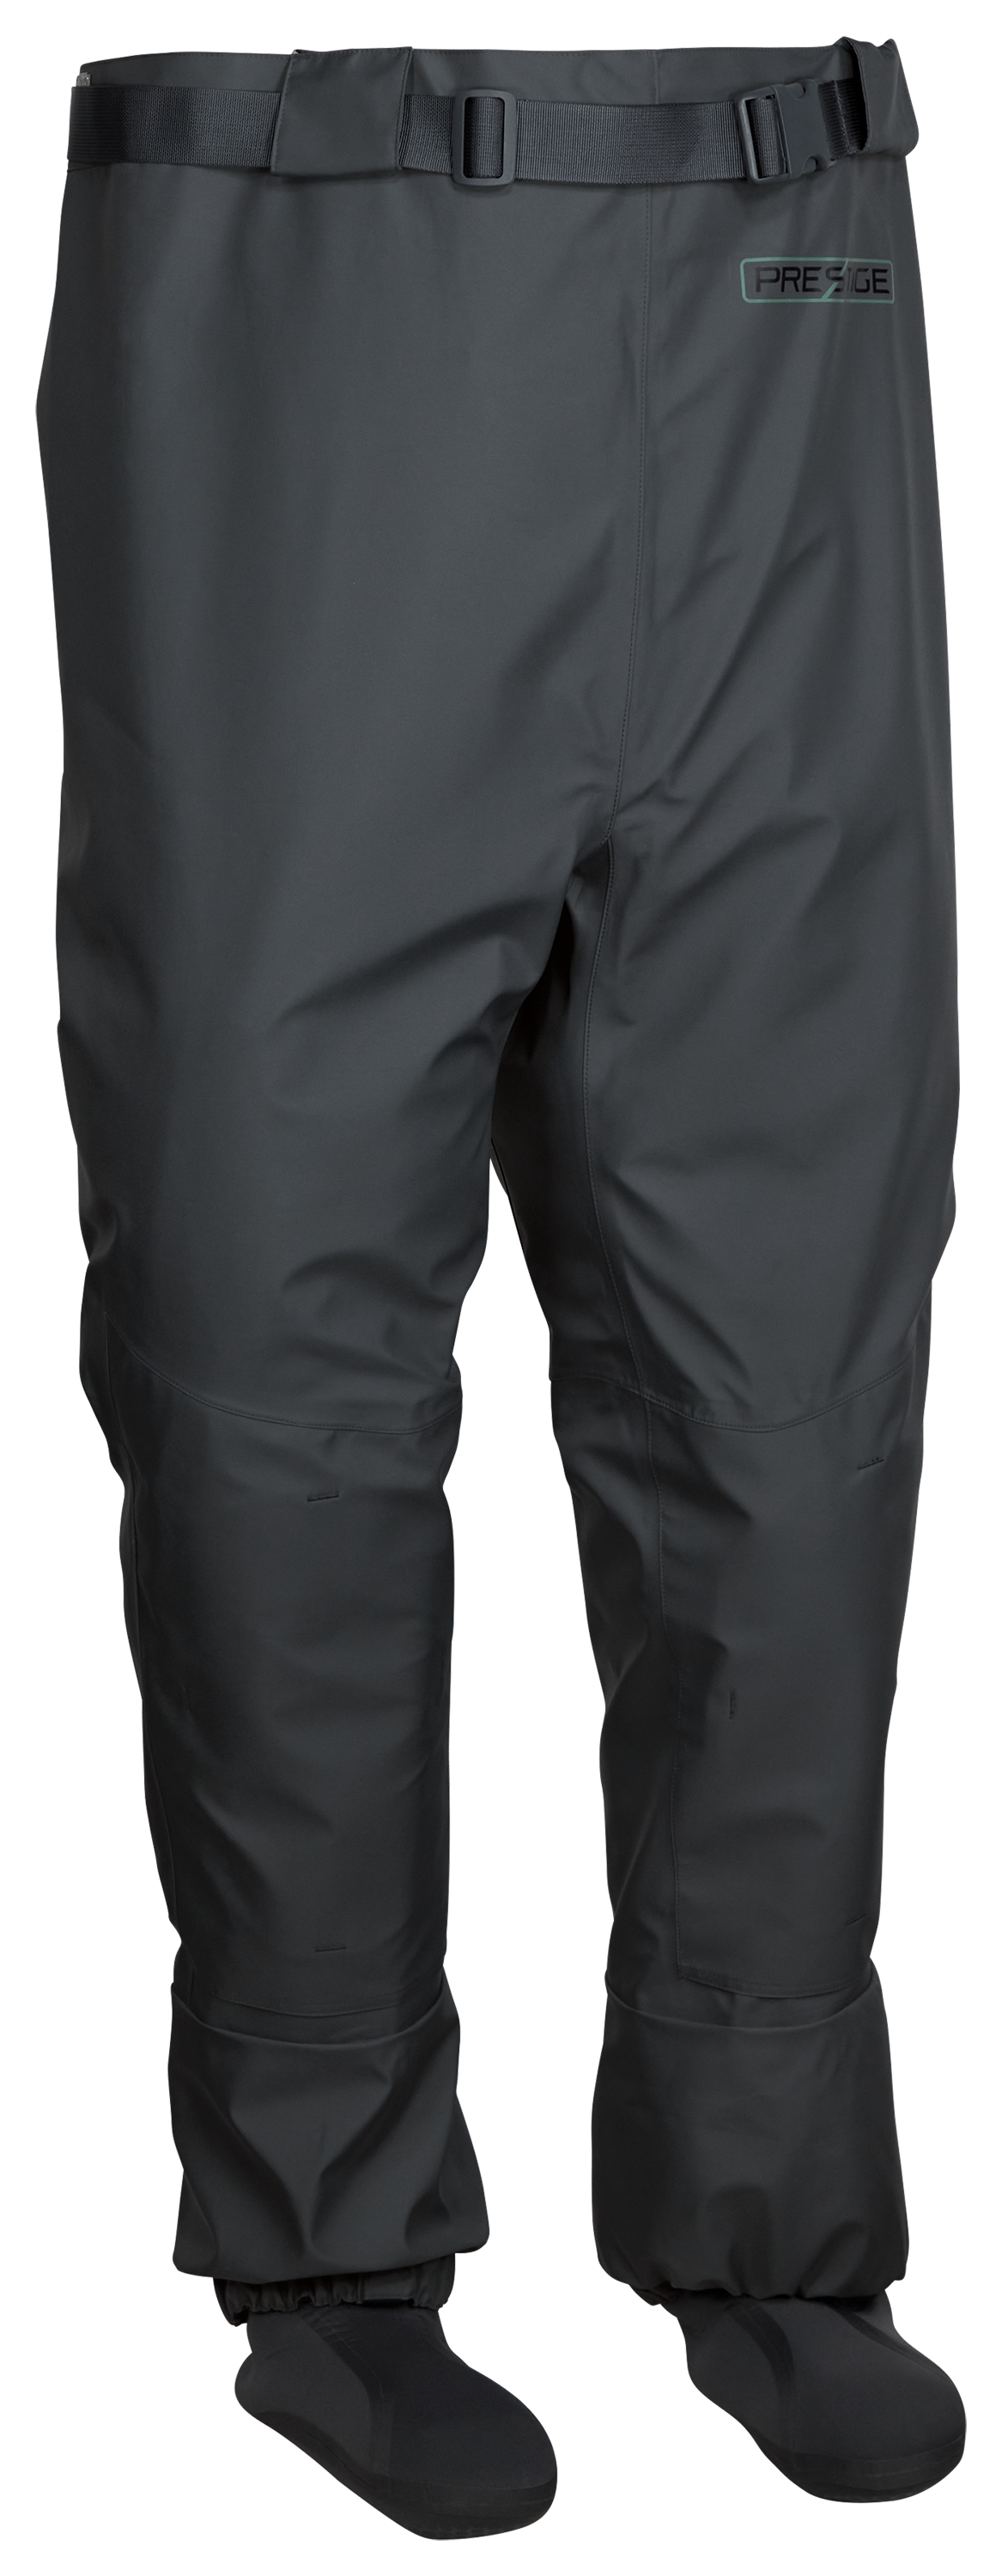 White River Fly Shop Prestige Waist Waders for Men - Cool Grey - Extra Large